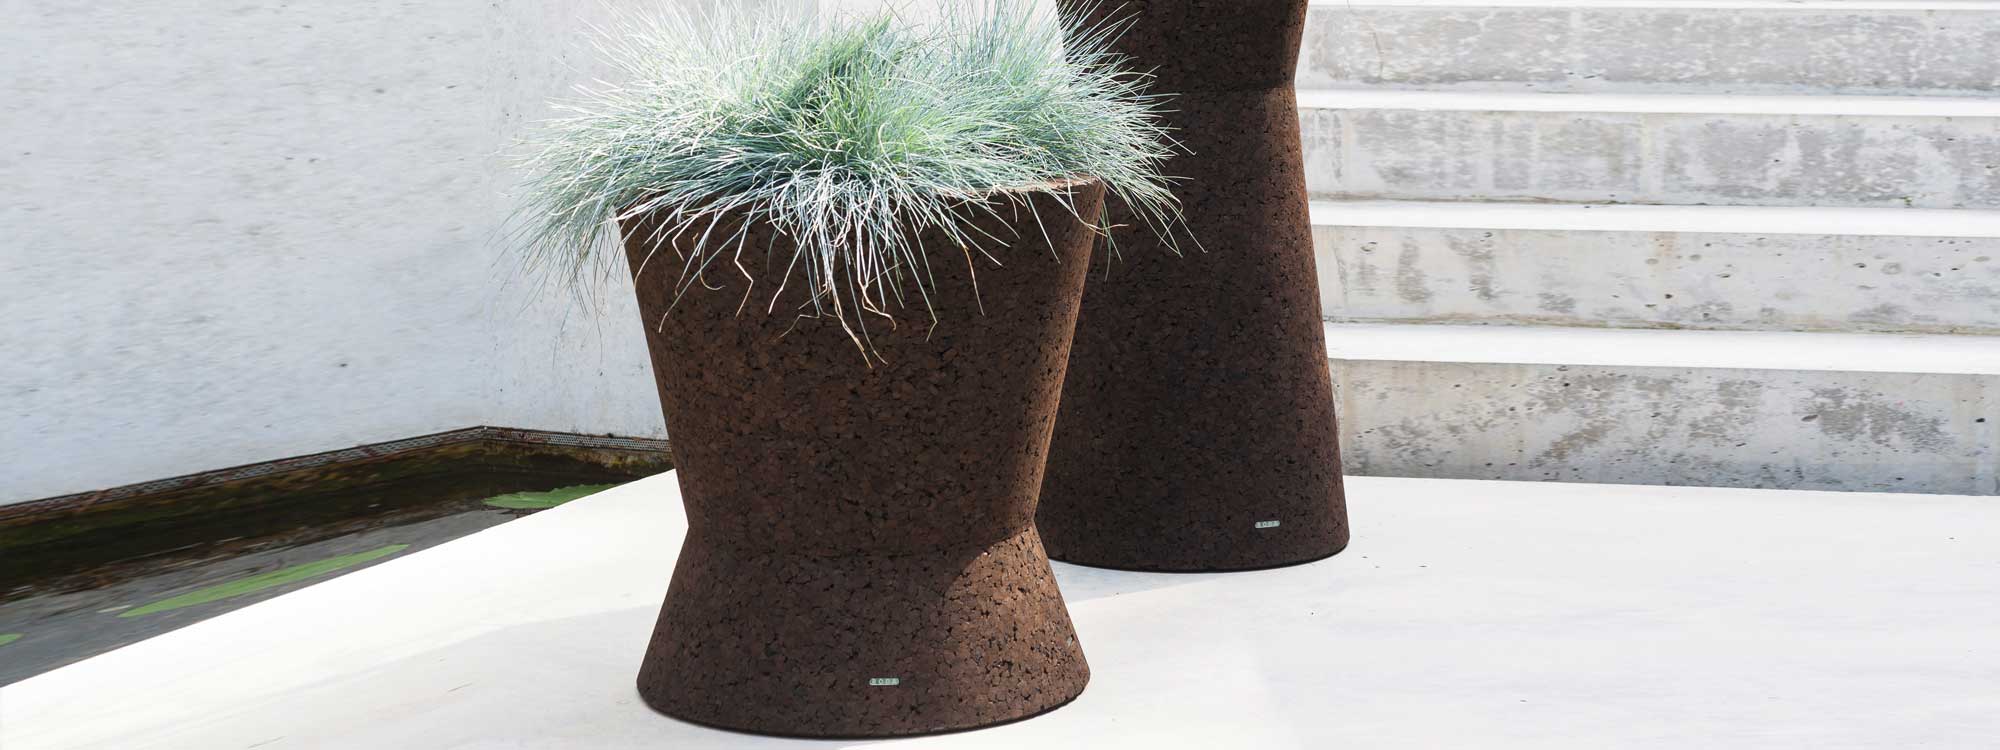 Bush On hour-glass shaped planter & eco planters are cork plant pots by Roda minimalist outdoor furniture company, Italy.